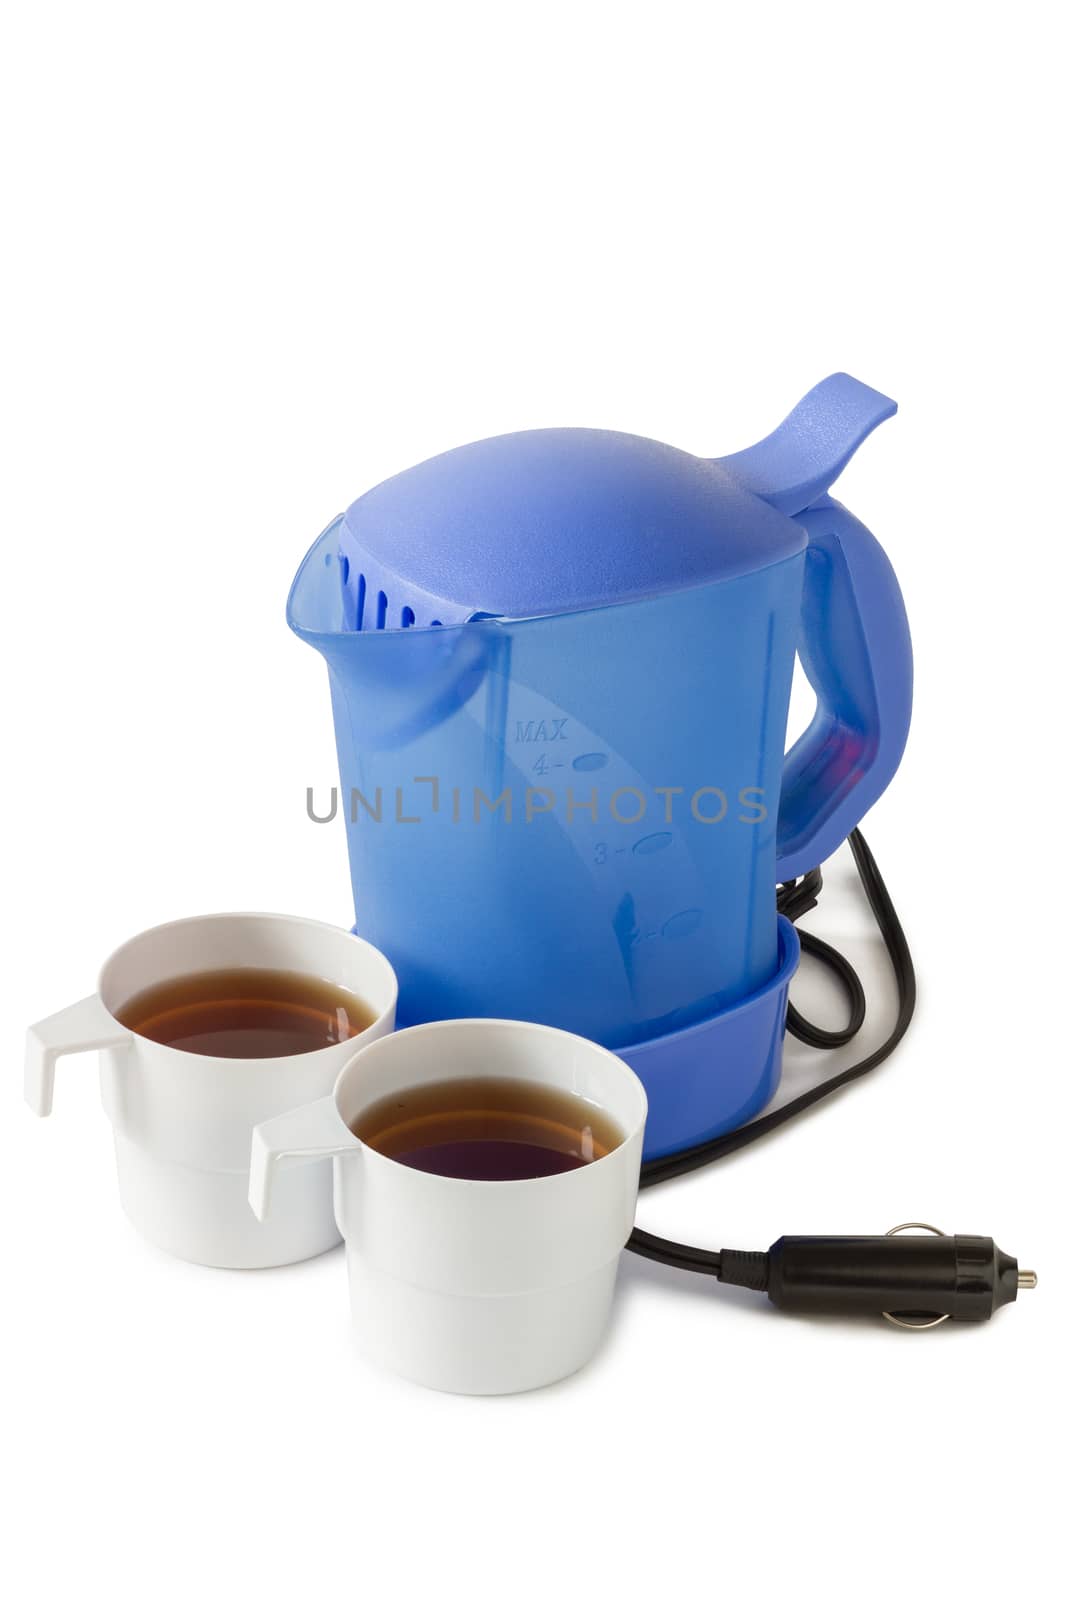 Car electric teapot isolated on white background